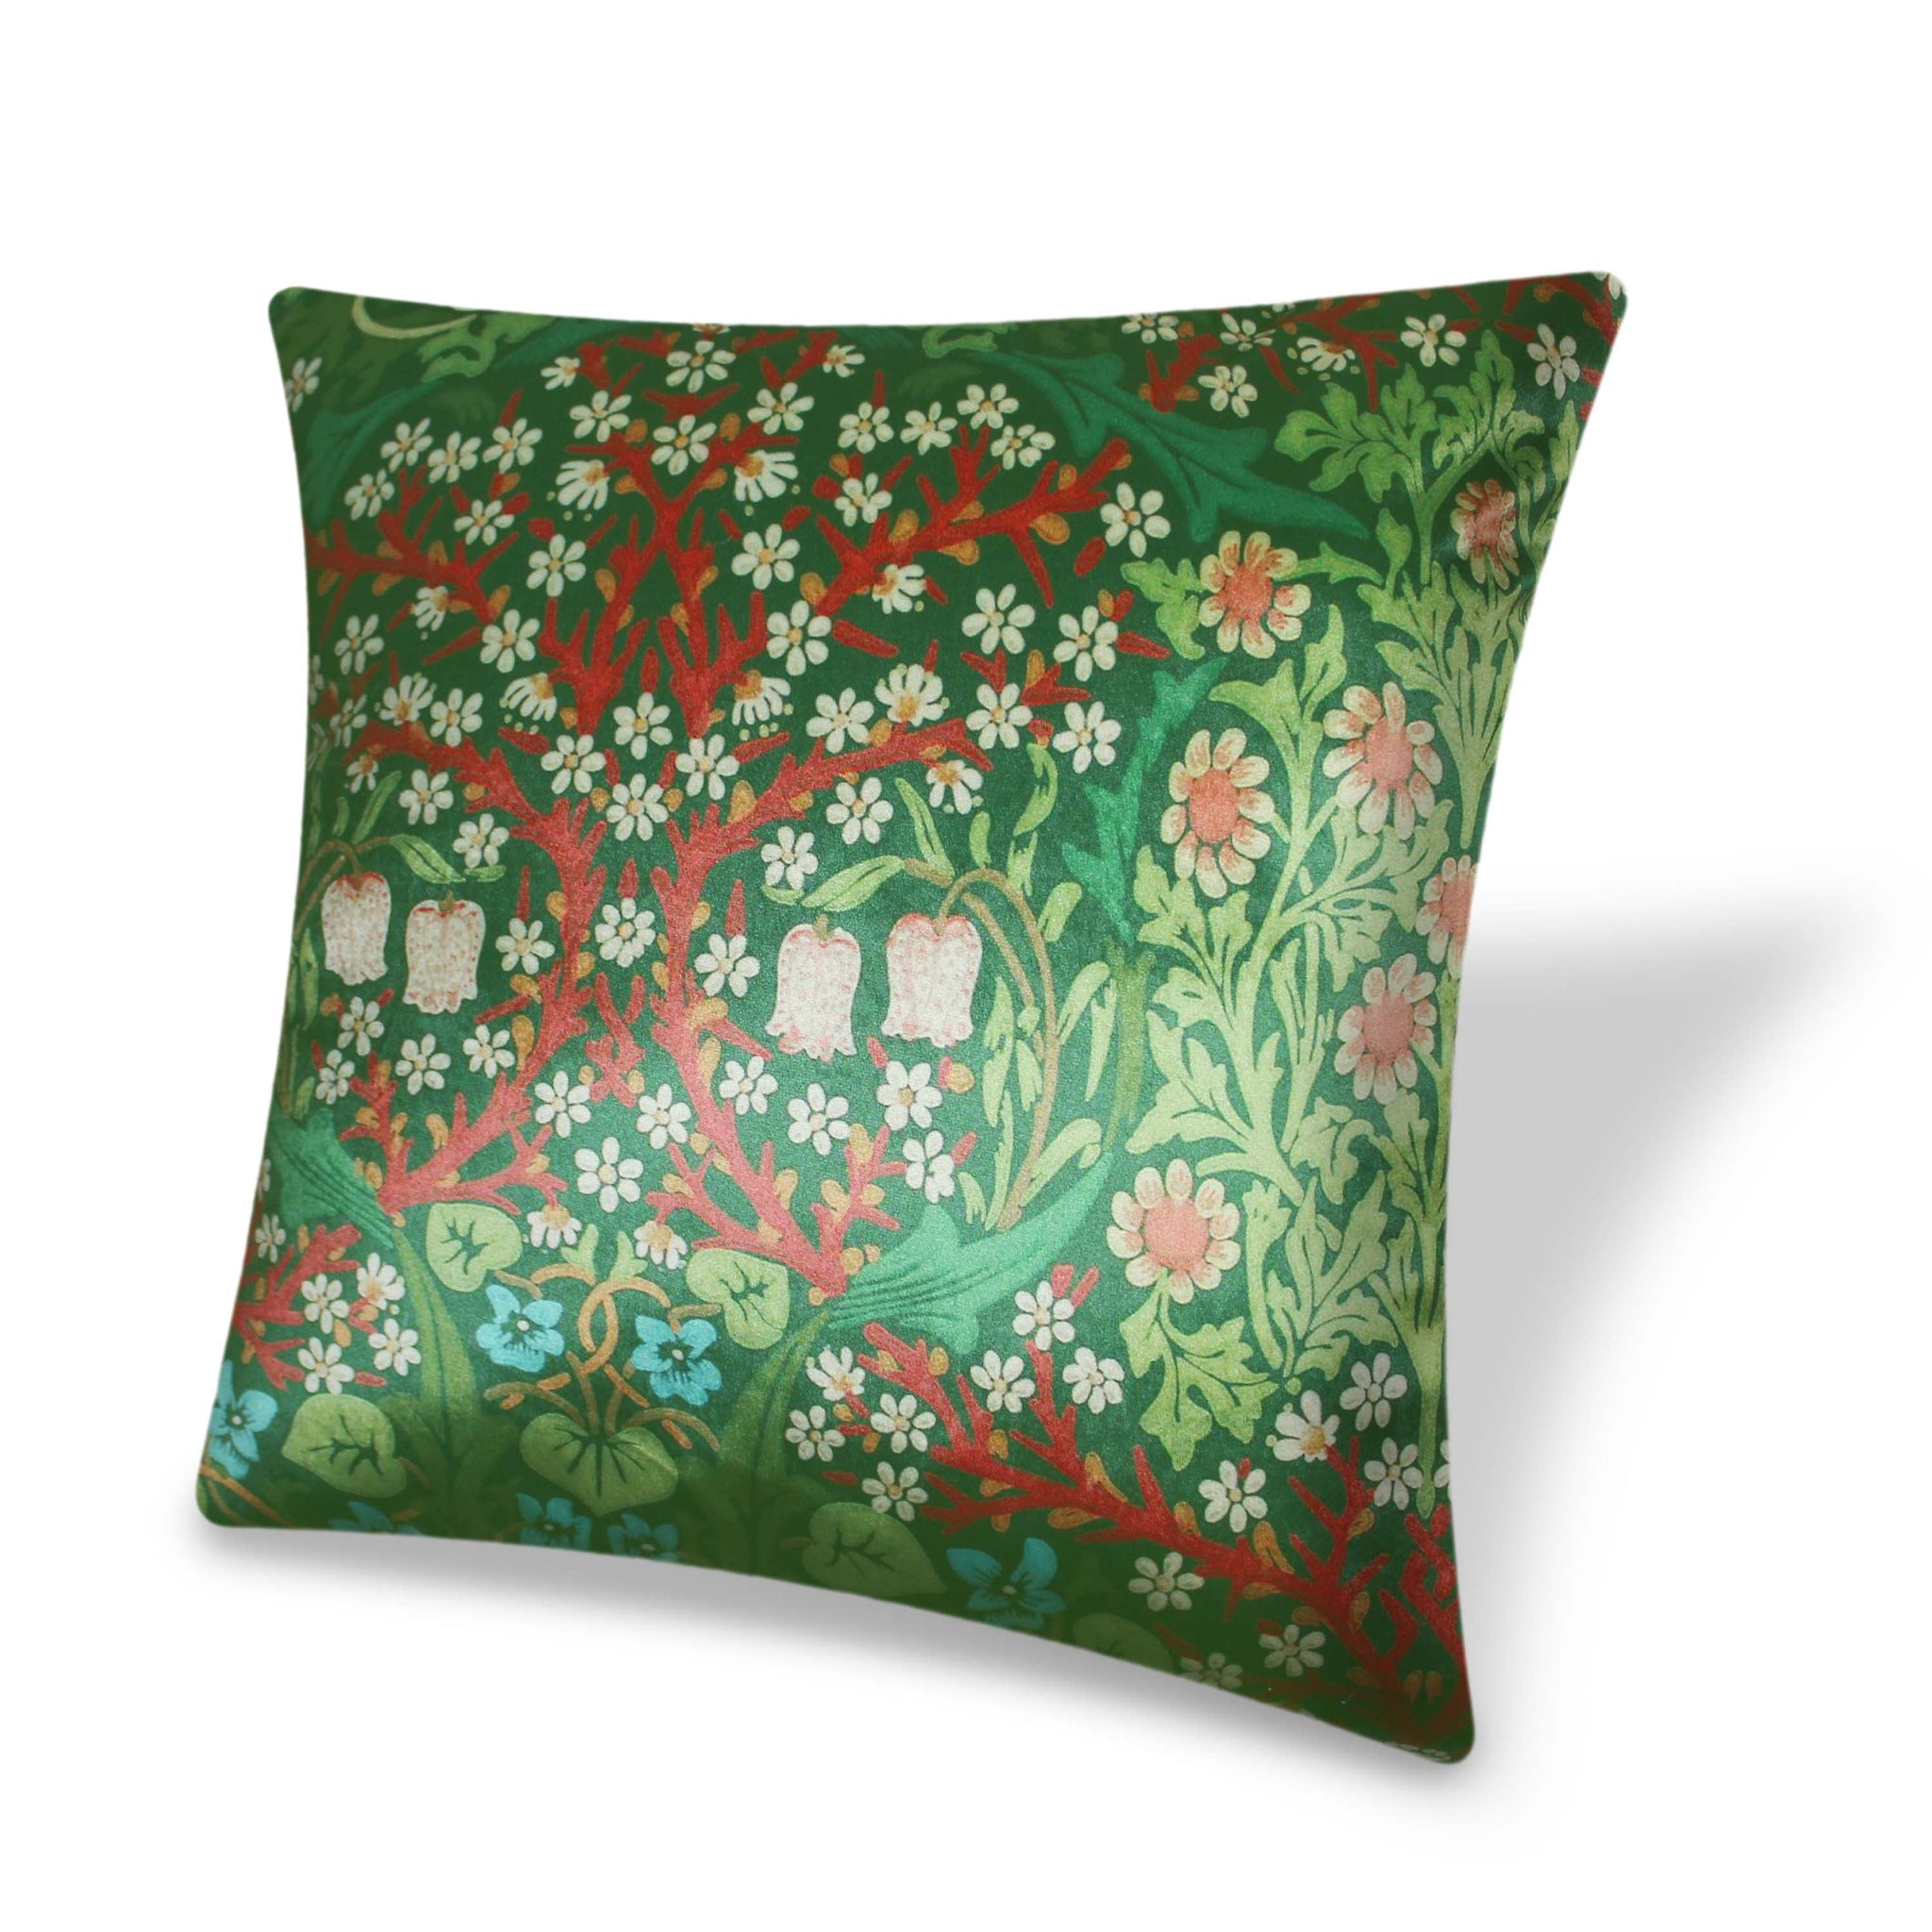 Velvet Cushion Cover Botanic Leaf and Flower Decorative pillowcase Iconic William Morris Floral Décor Throw Pillow for Sofa Chair Bedroom Living Room Multi Color 45x45cm (18x18 Inches)